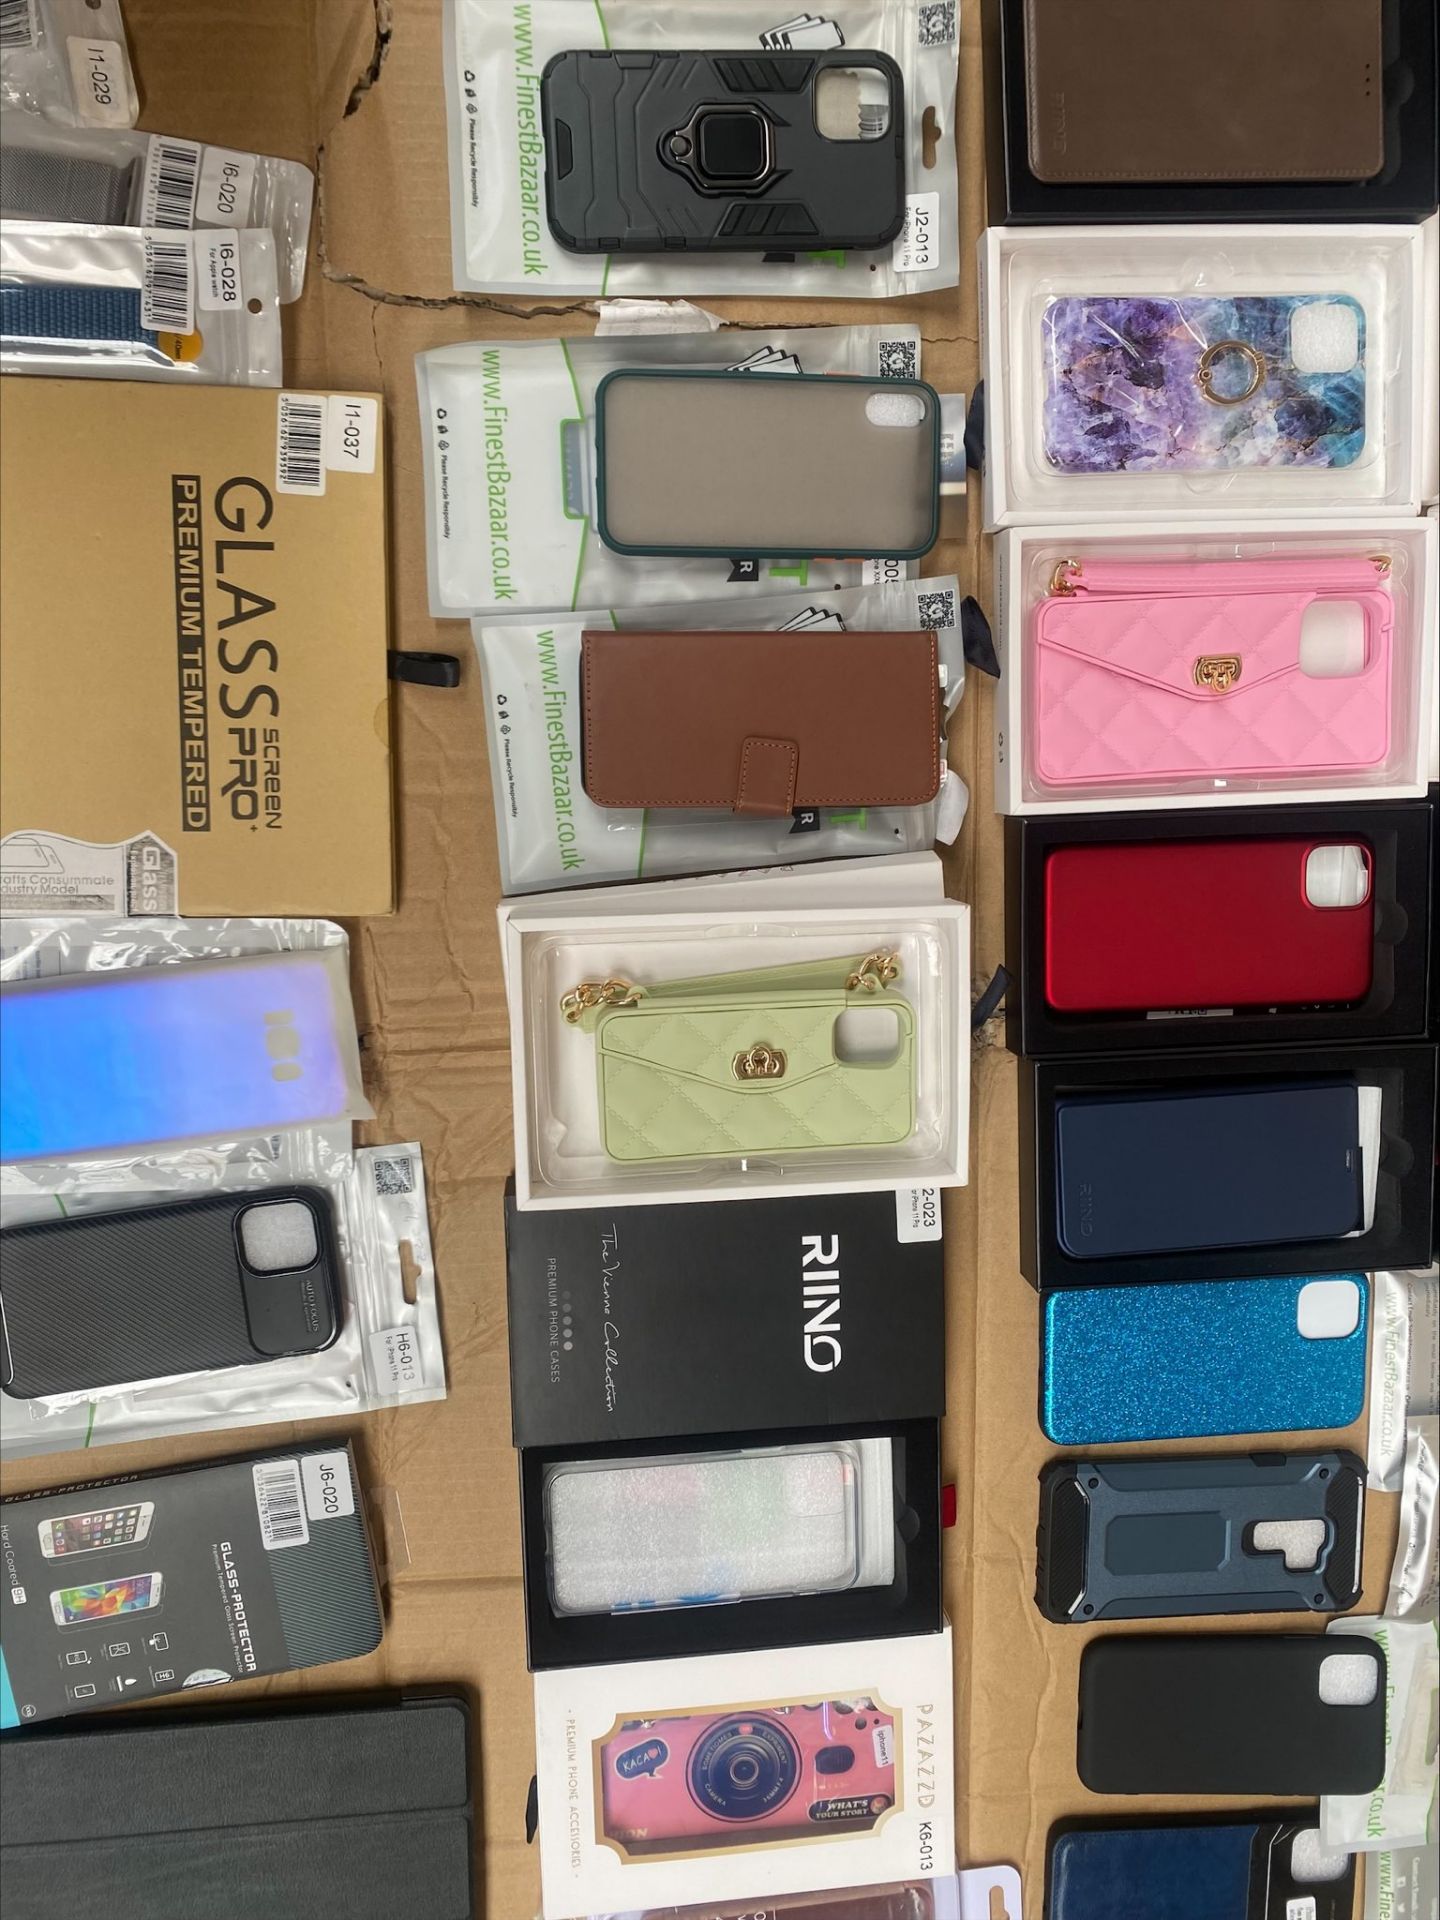 Joblot 5K Units iPhone, Samsung, Airpod, Apple Watch, Charging Cables, Phone Covers Accessories - Image 10 of 17